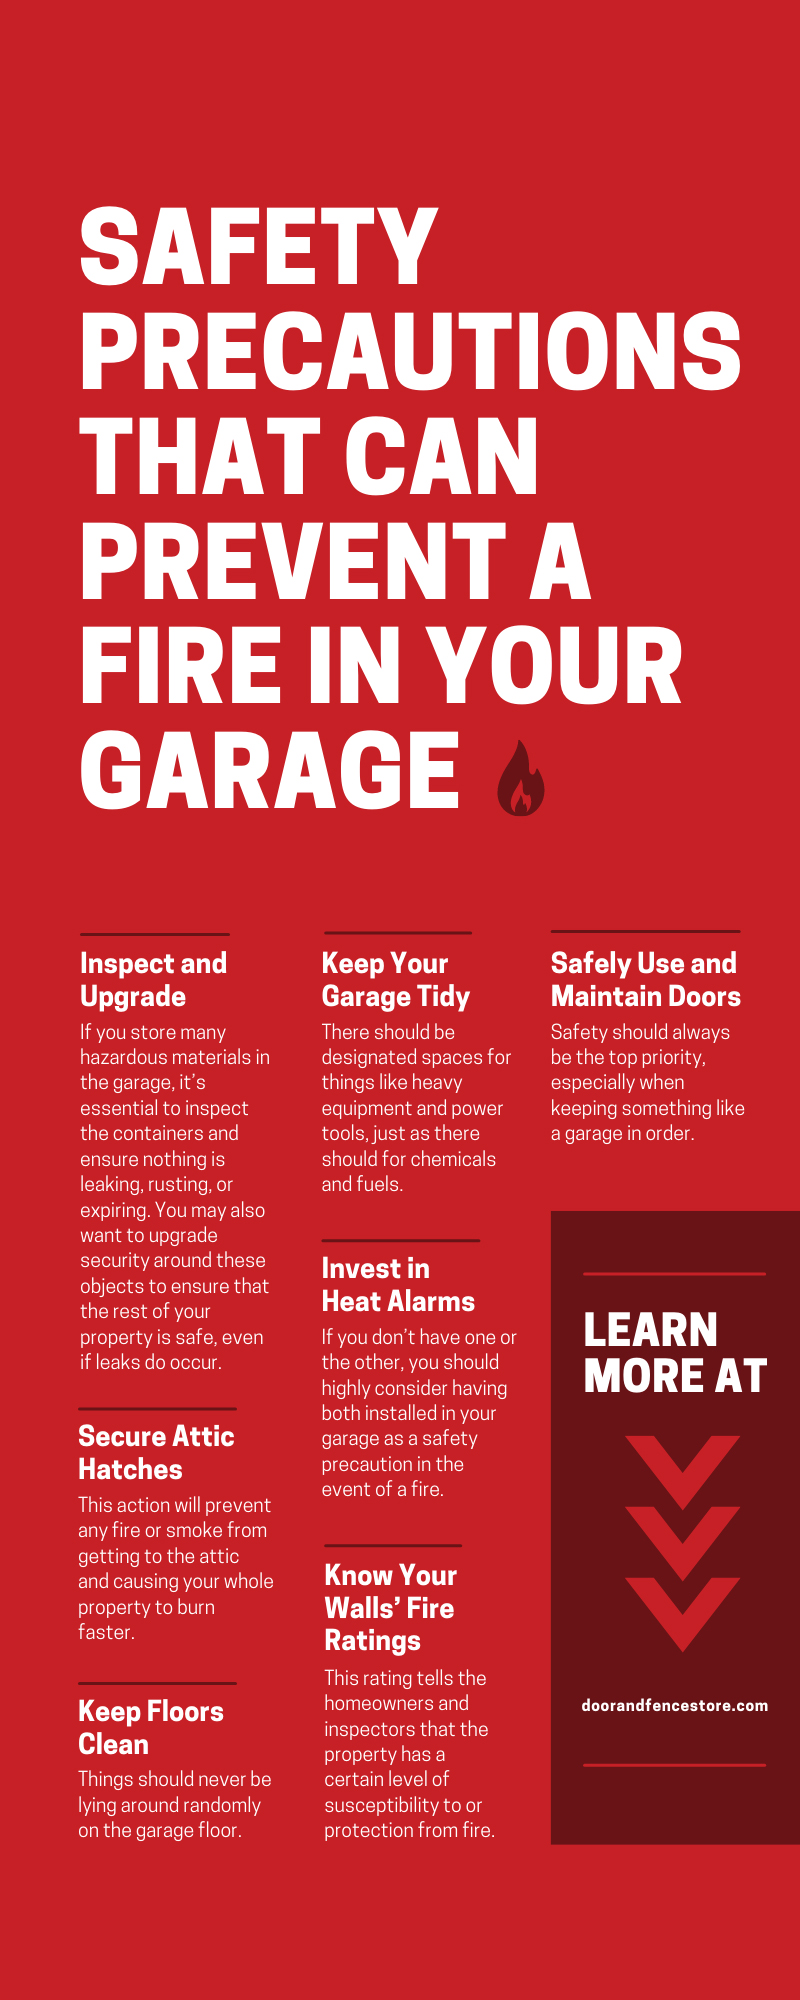 Safety Precautions That Can Prevent a Fire in Your Garage